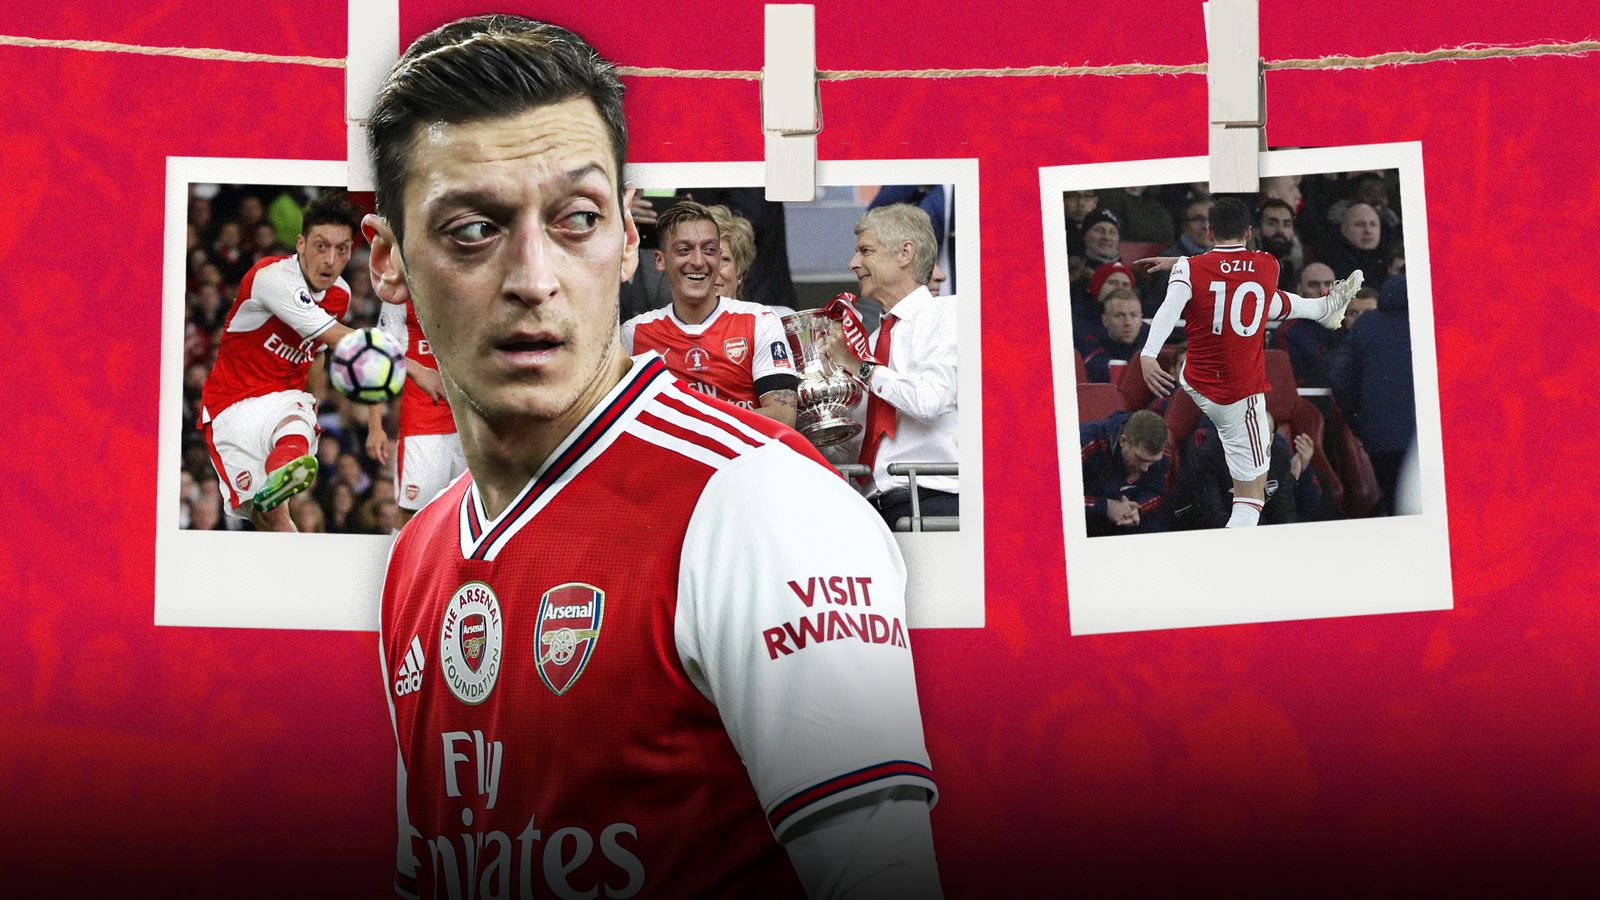 Mesut Ozil retires: Arsenal midfielder left a complex legacy at Arsenal after years of ups and downs